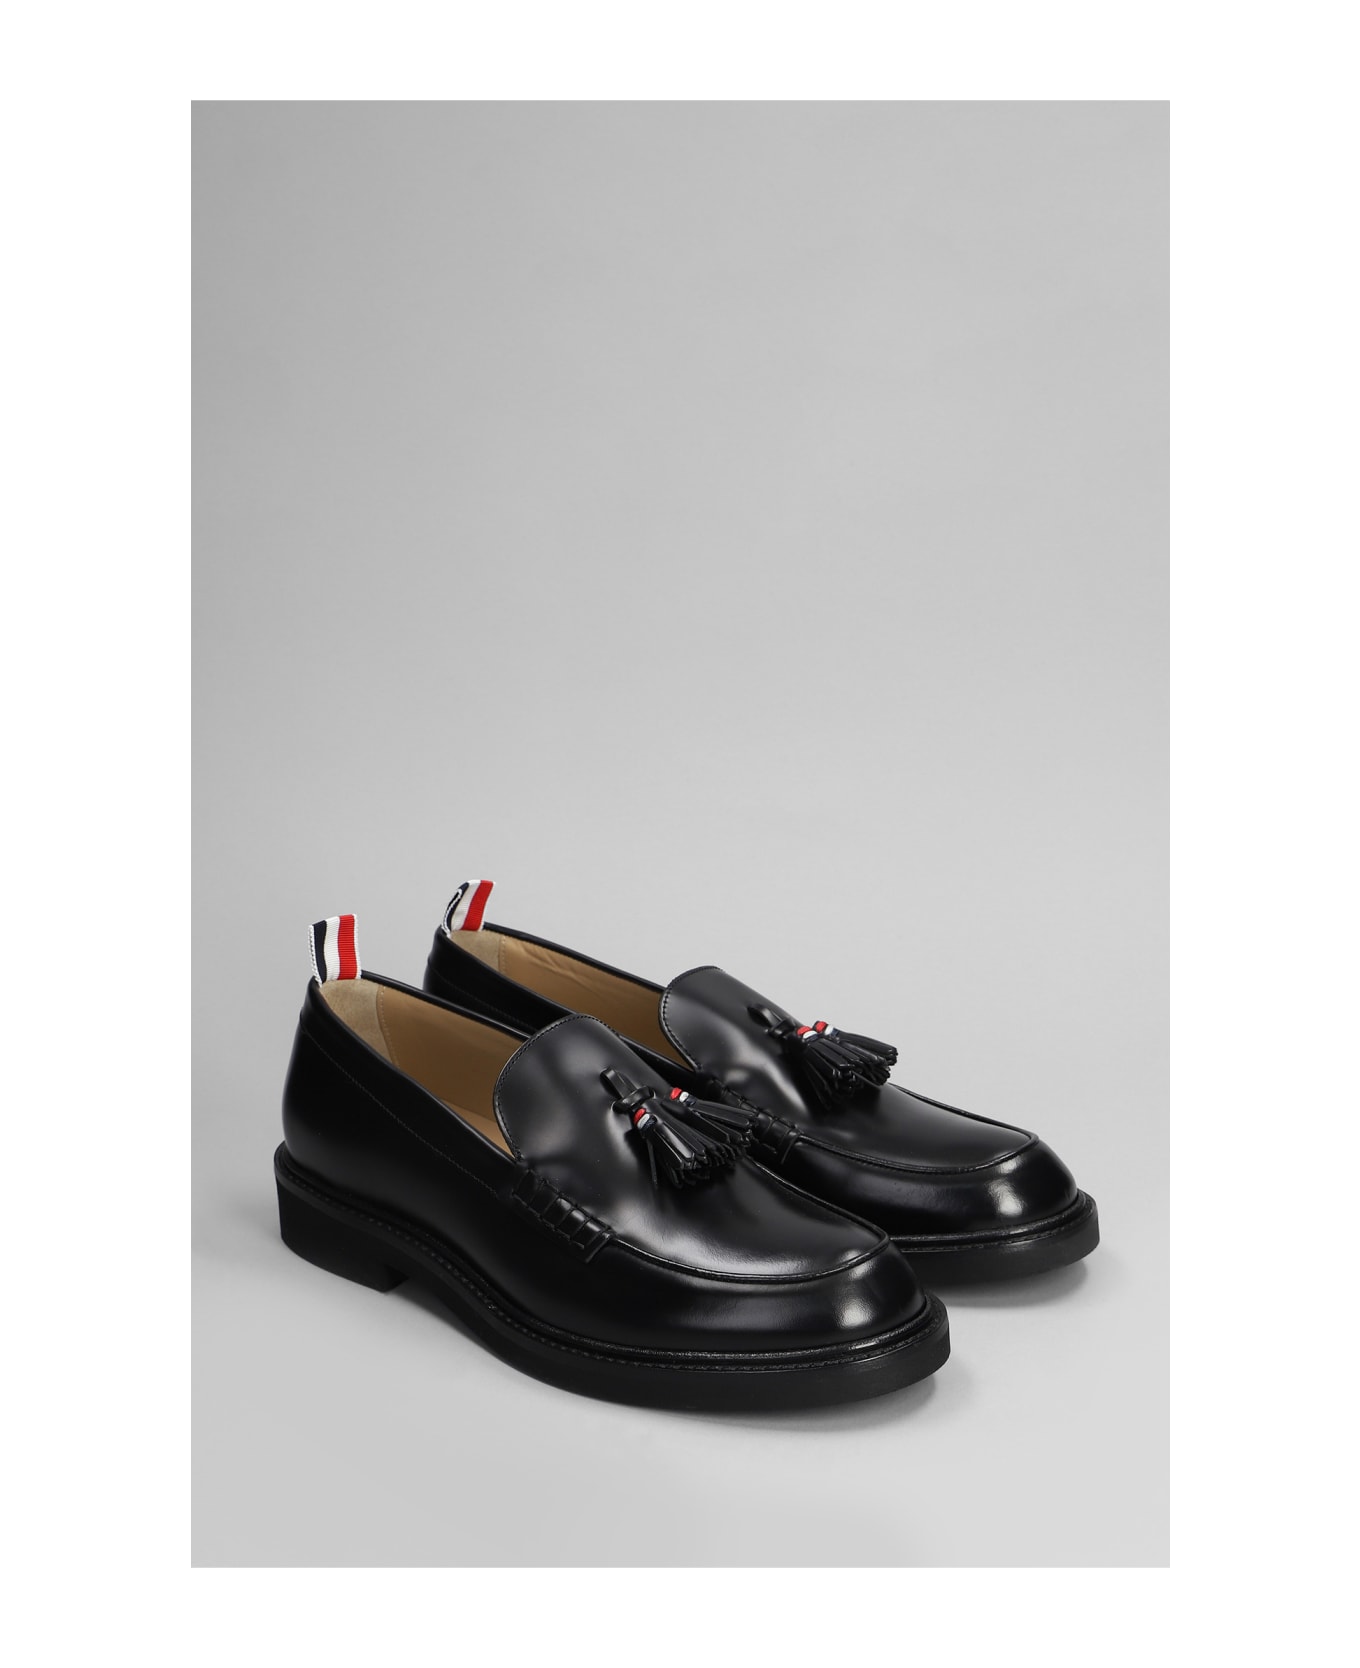 Thom Browne Loafers In Black Leather - black